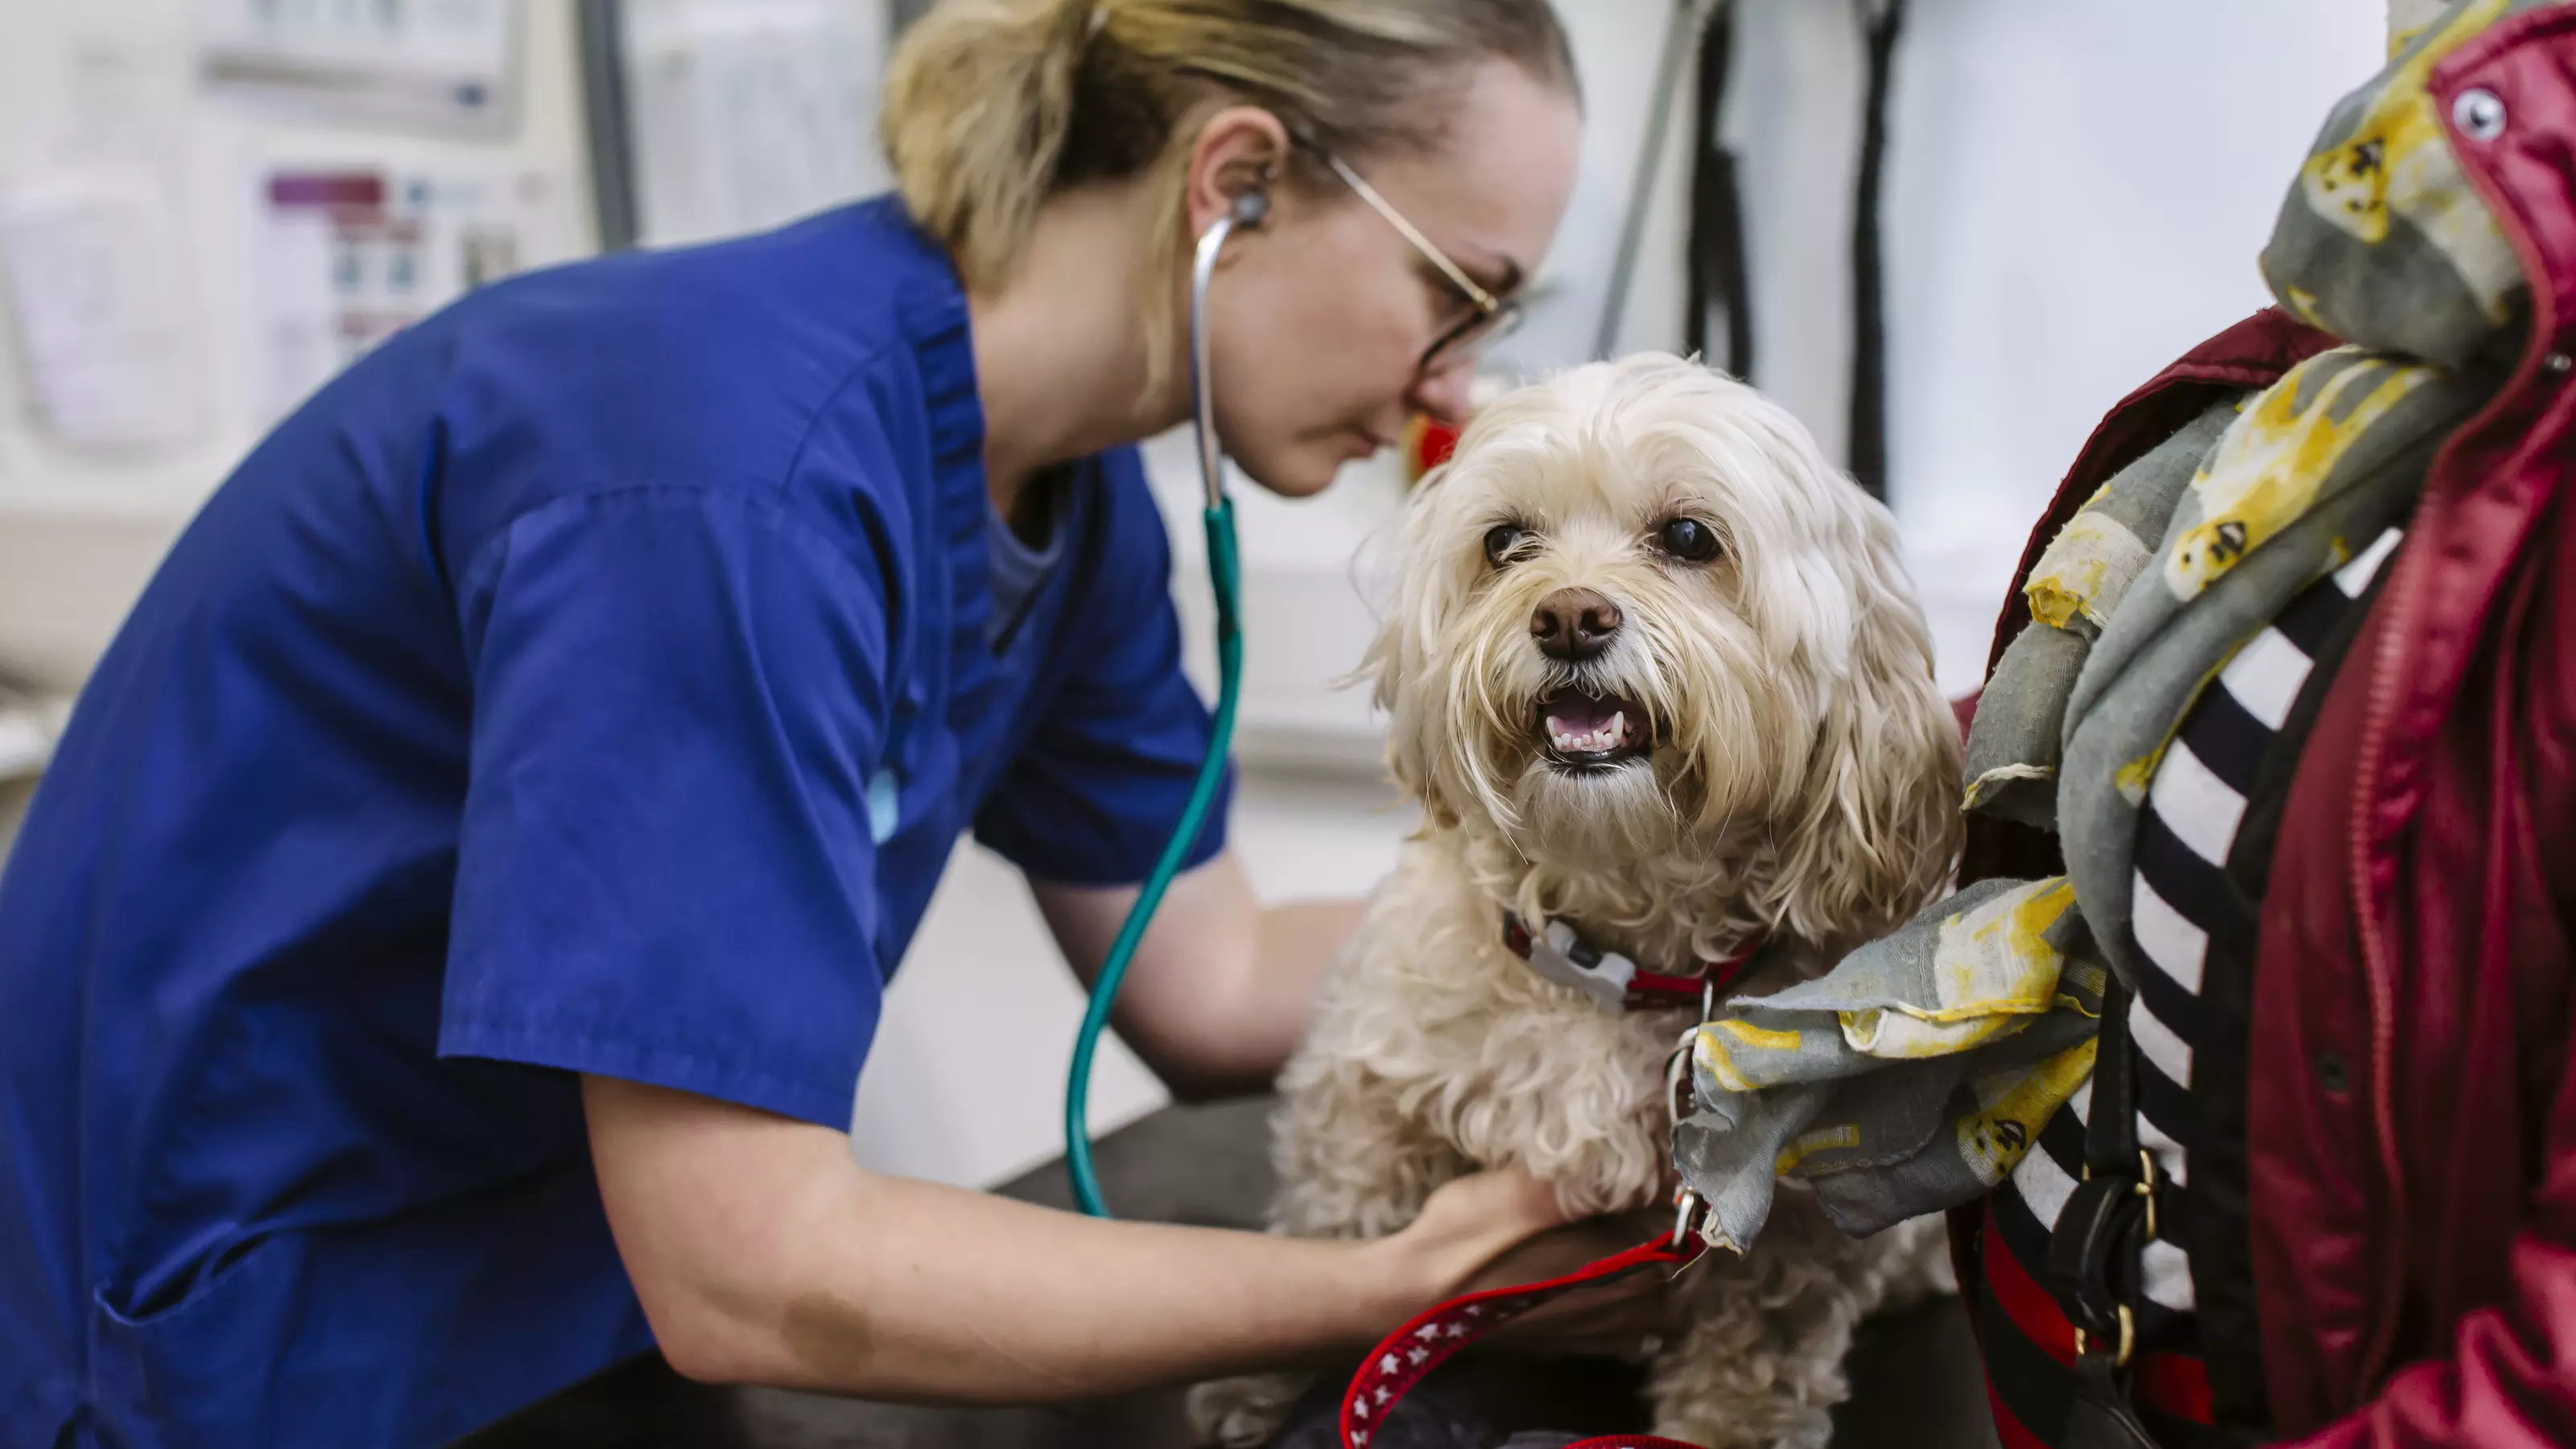 Vet checking dog with stethoscope with owner present